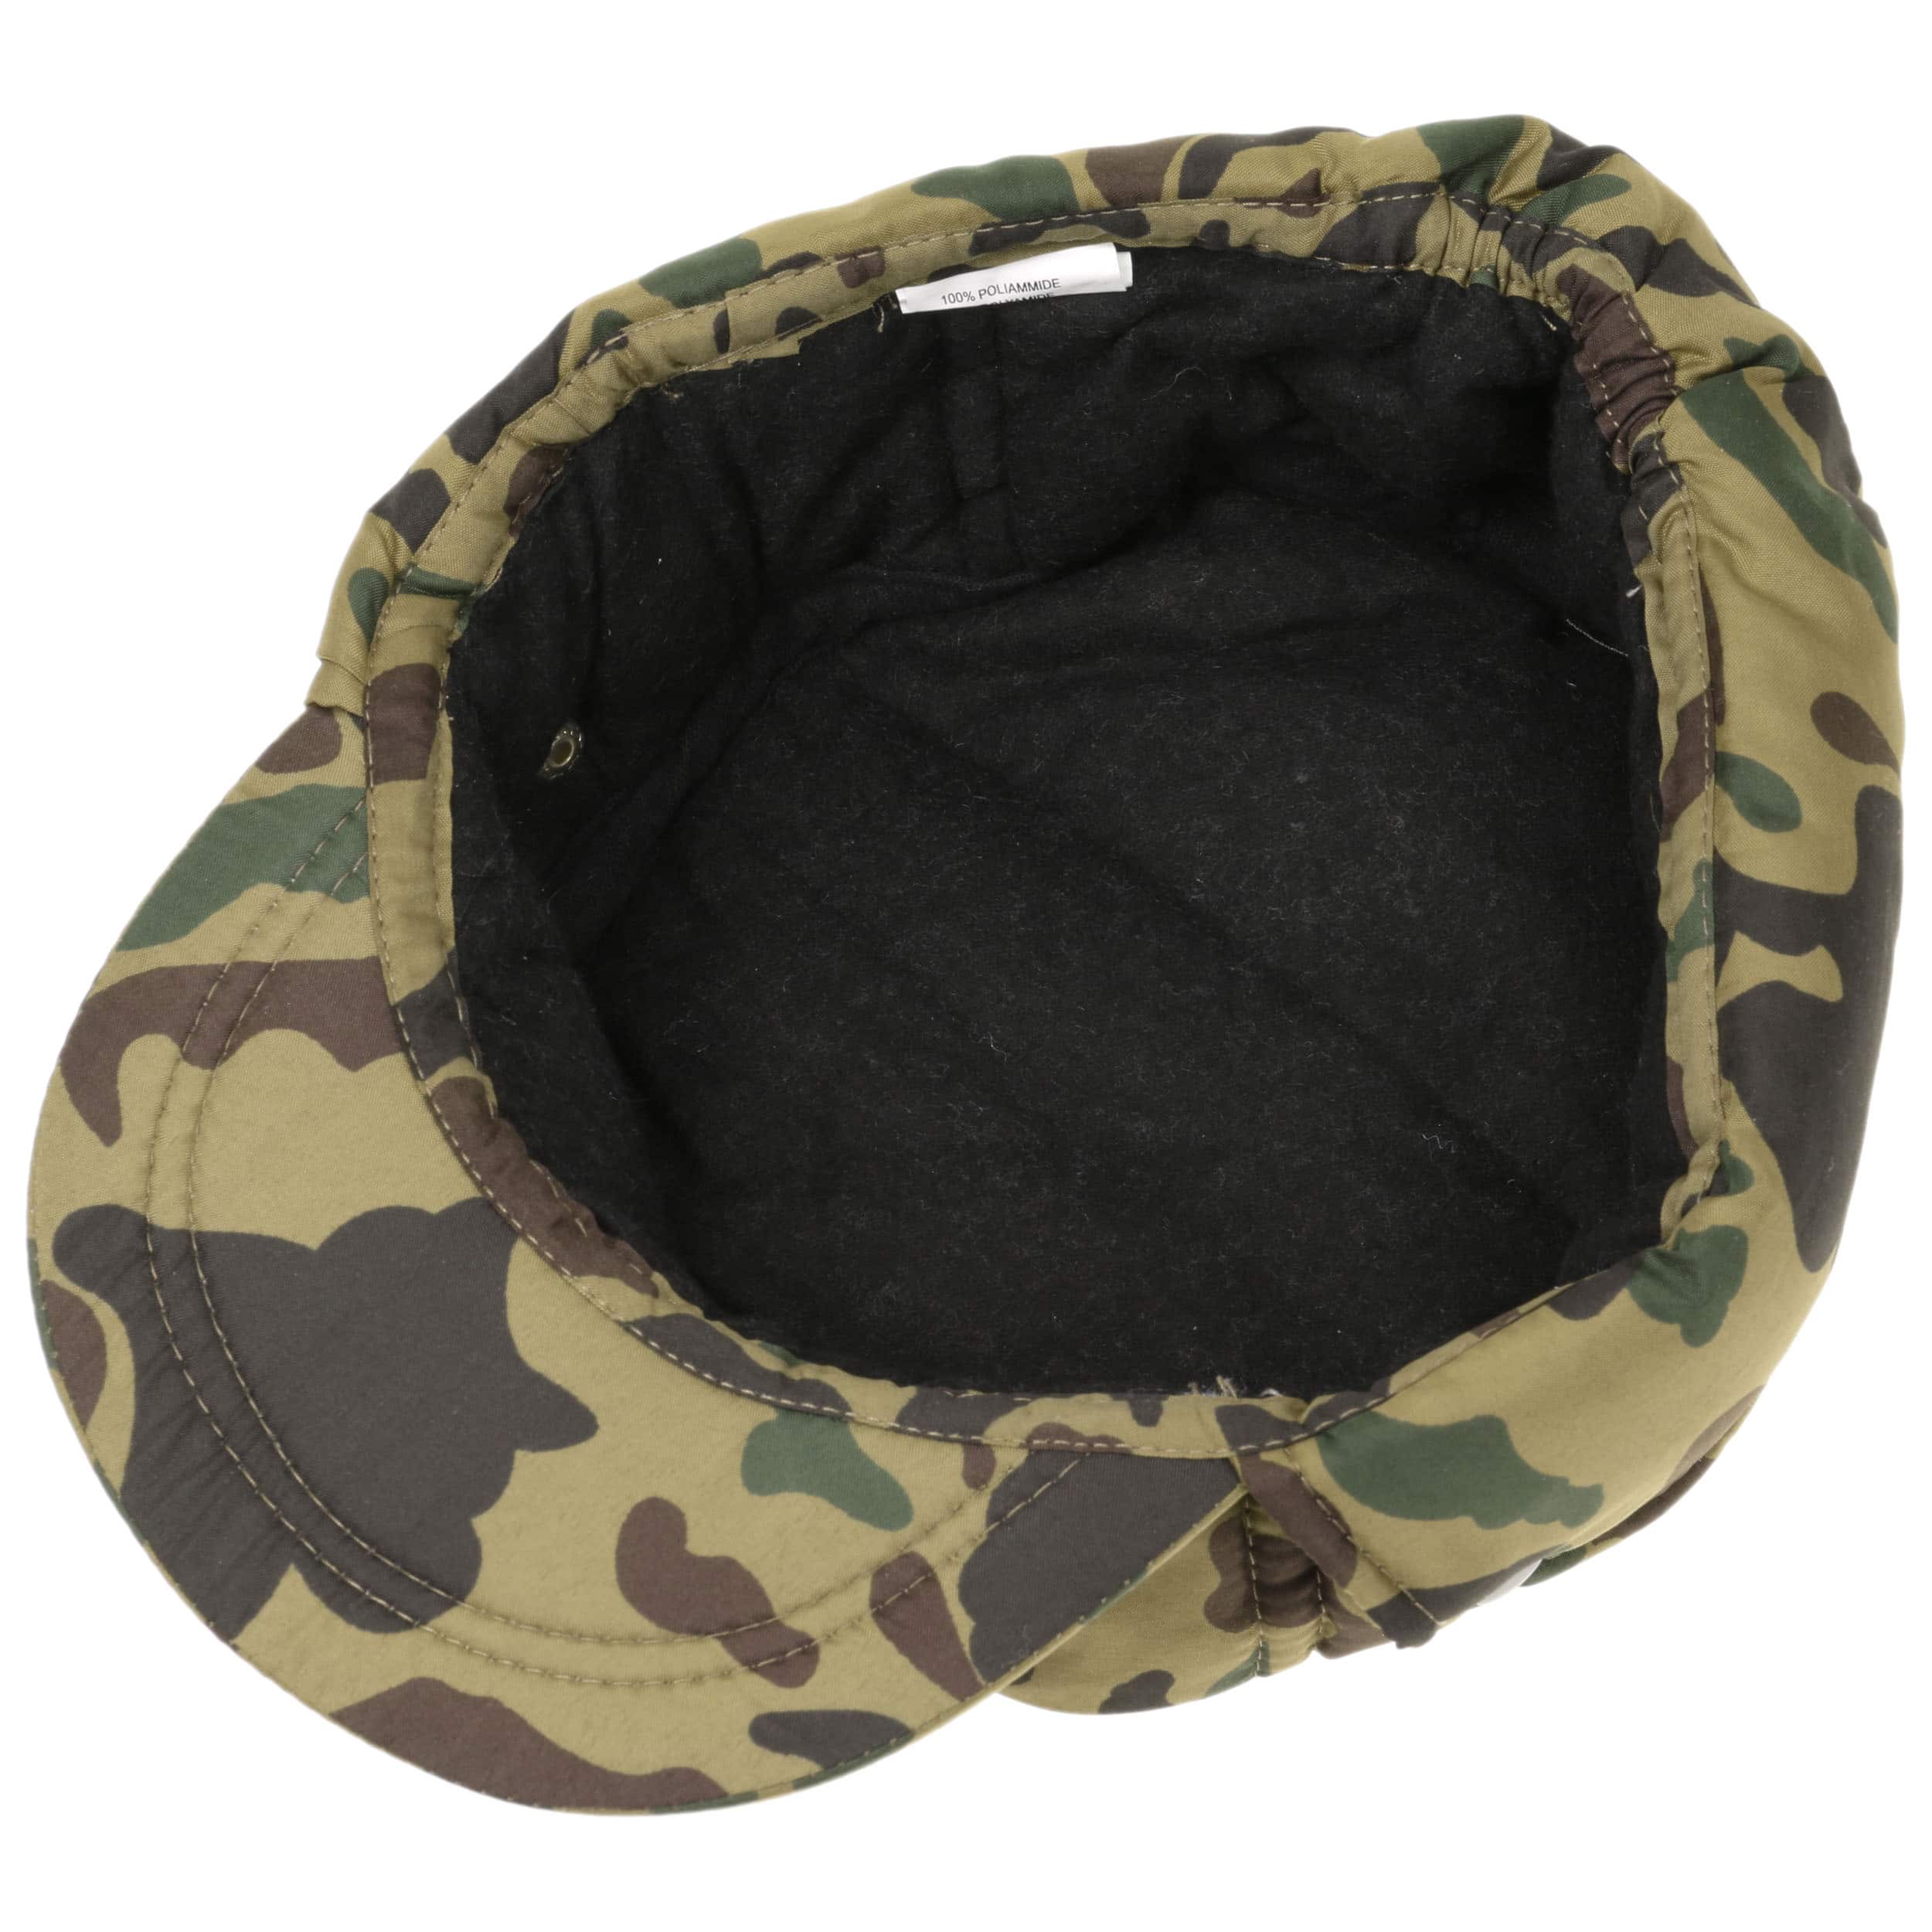 Camouflage Army Cap with Ear Flaps by Lipodo - 14,95